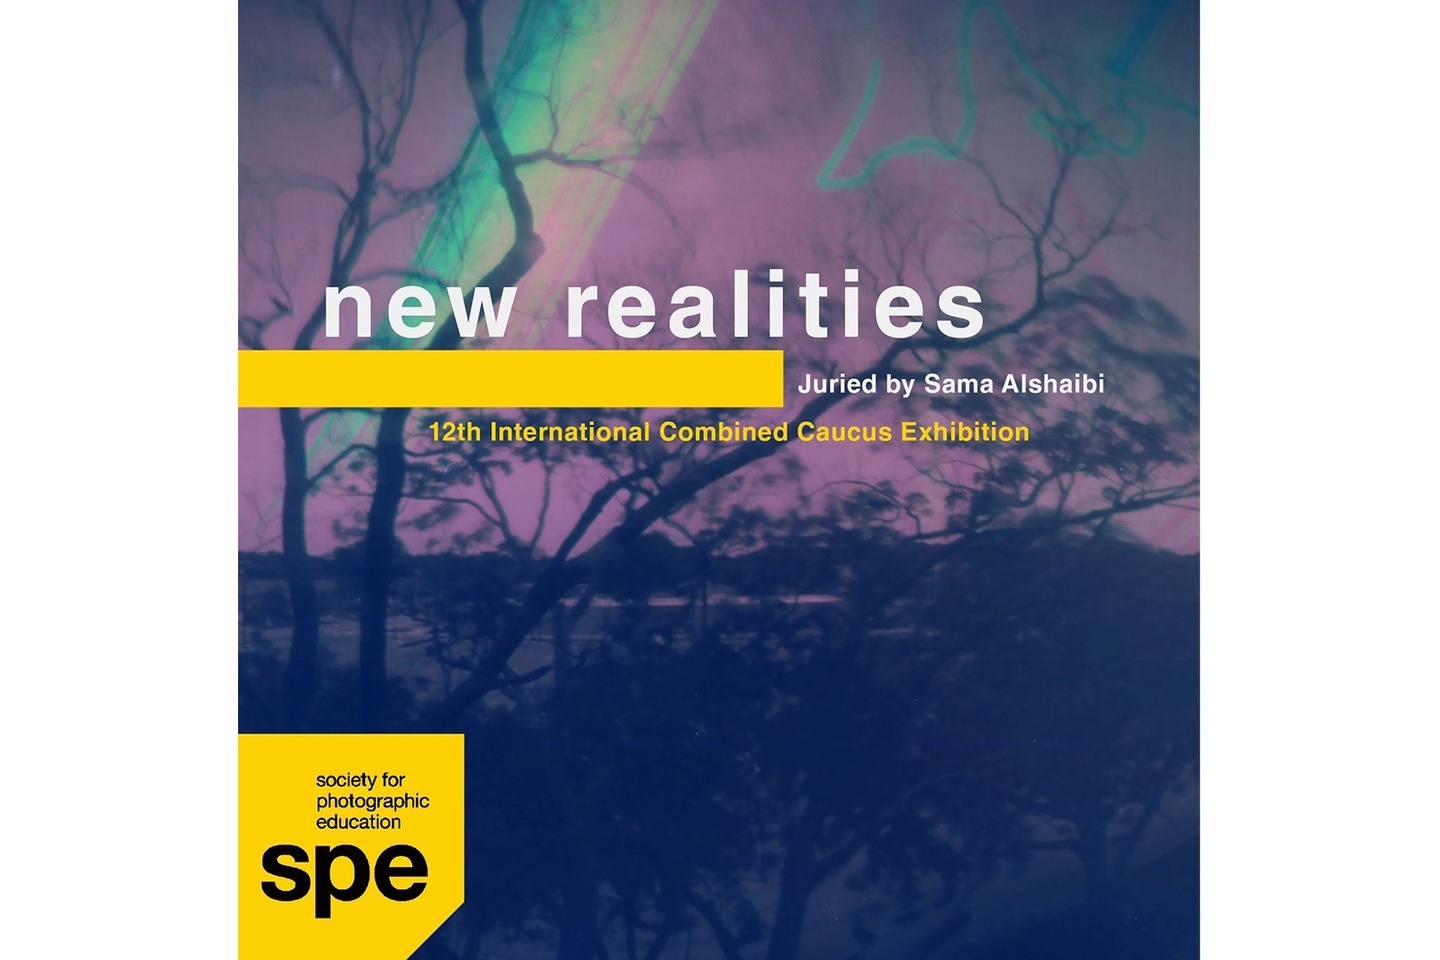 Purple and dark blue silhouette of trees with the words "new realities" and the SPE logo in the corner